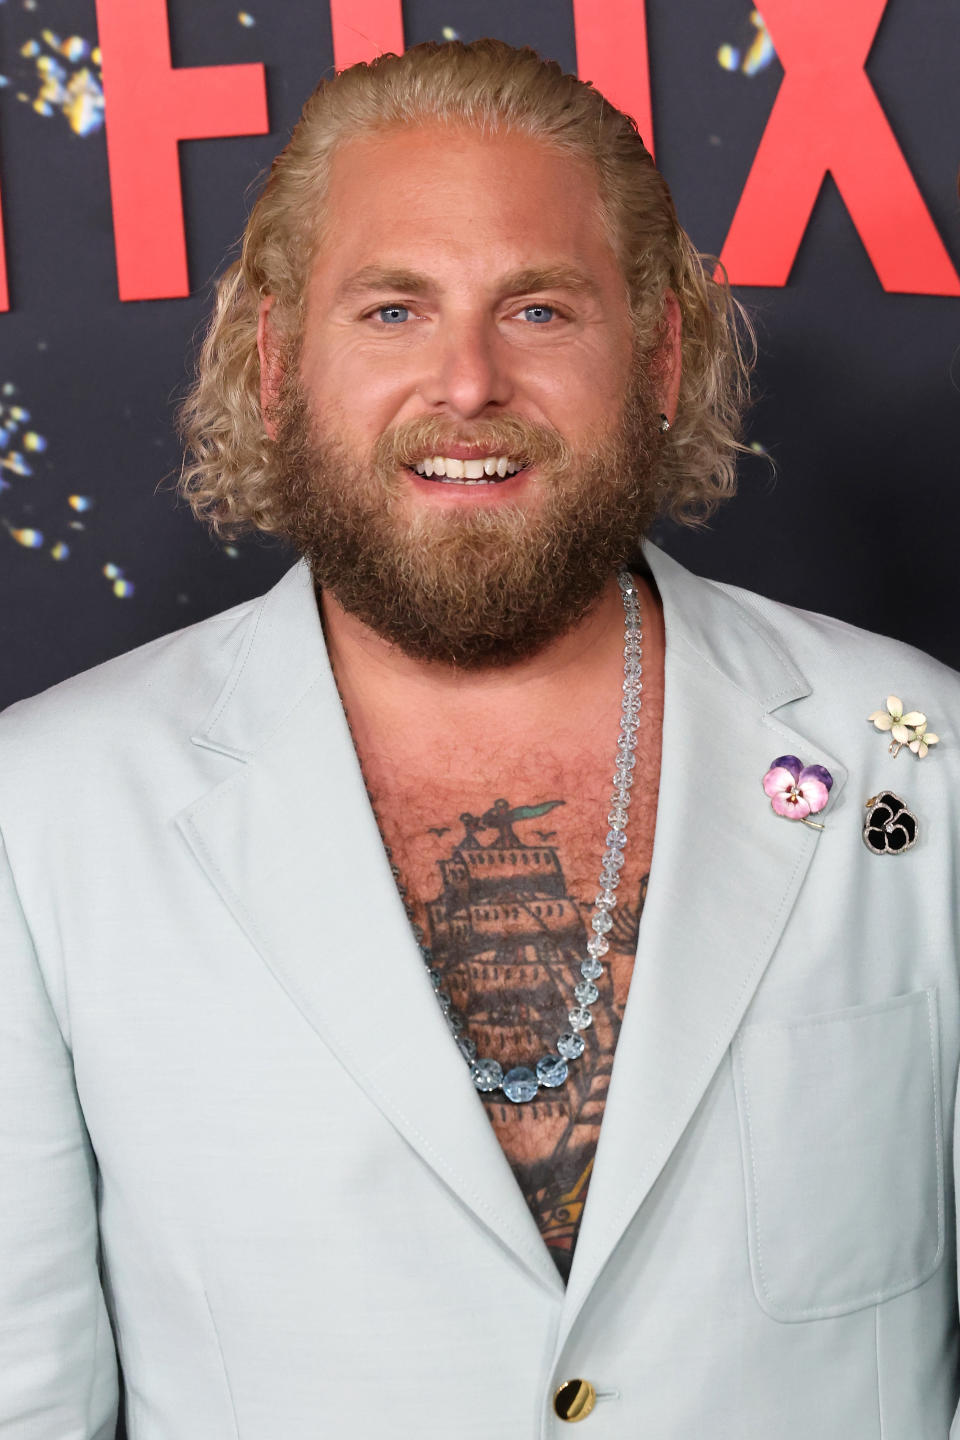 Jonah Hill, wearing a light-colored suit with a necklace and floral brooches, poses on the red carpet. He has a beard and curly hair